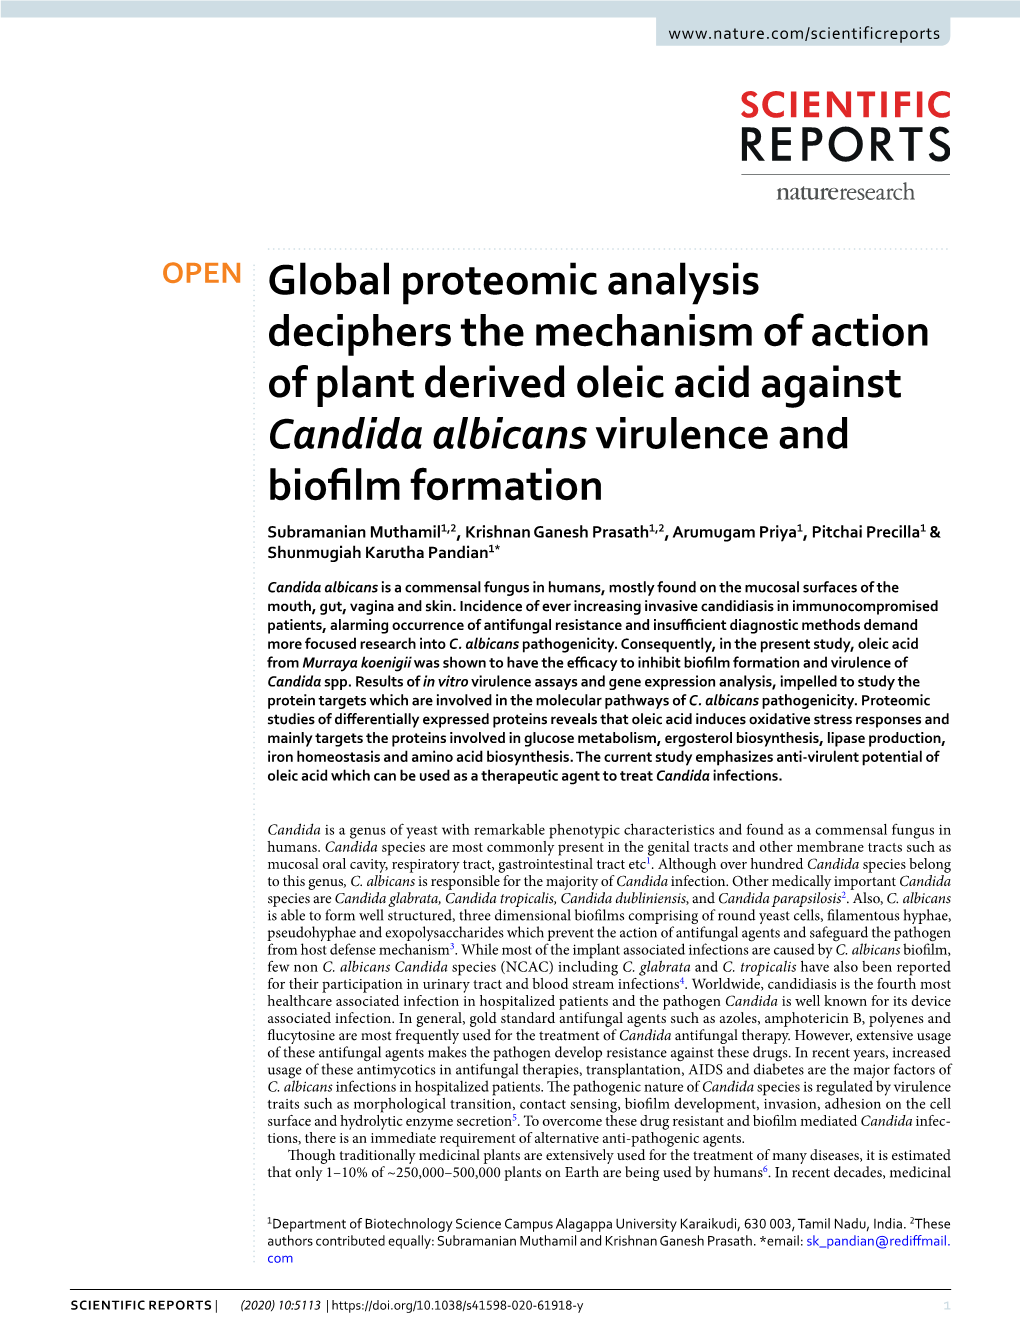 Global Proteomic Analysis Deciphers the Mechanism of Action of Plant